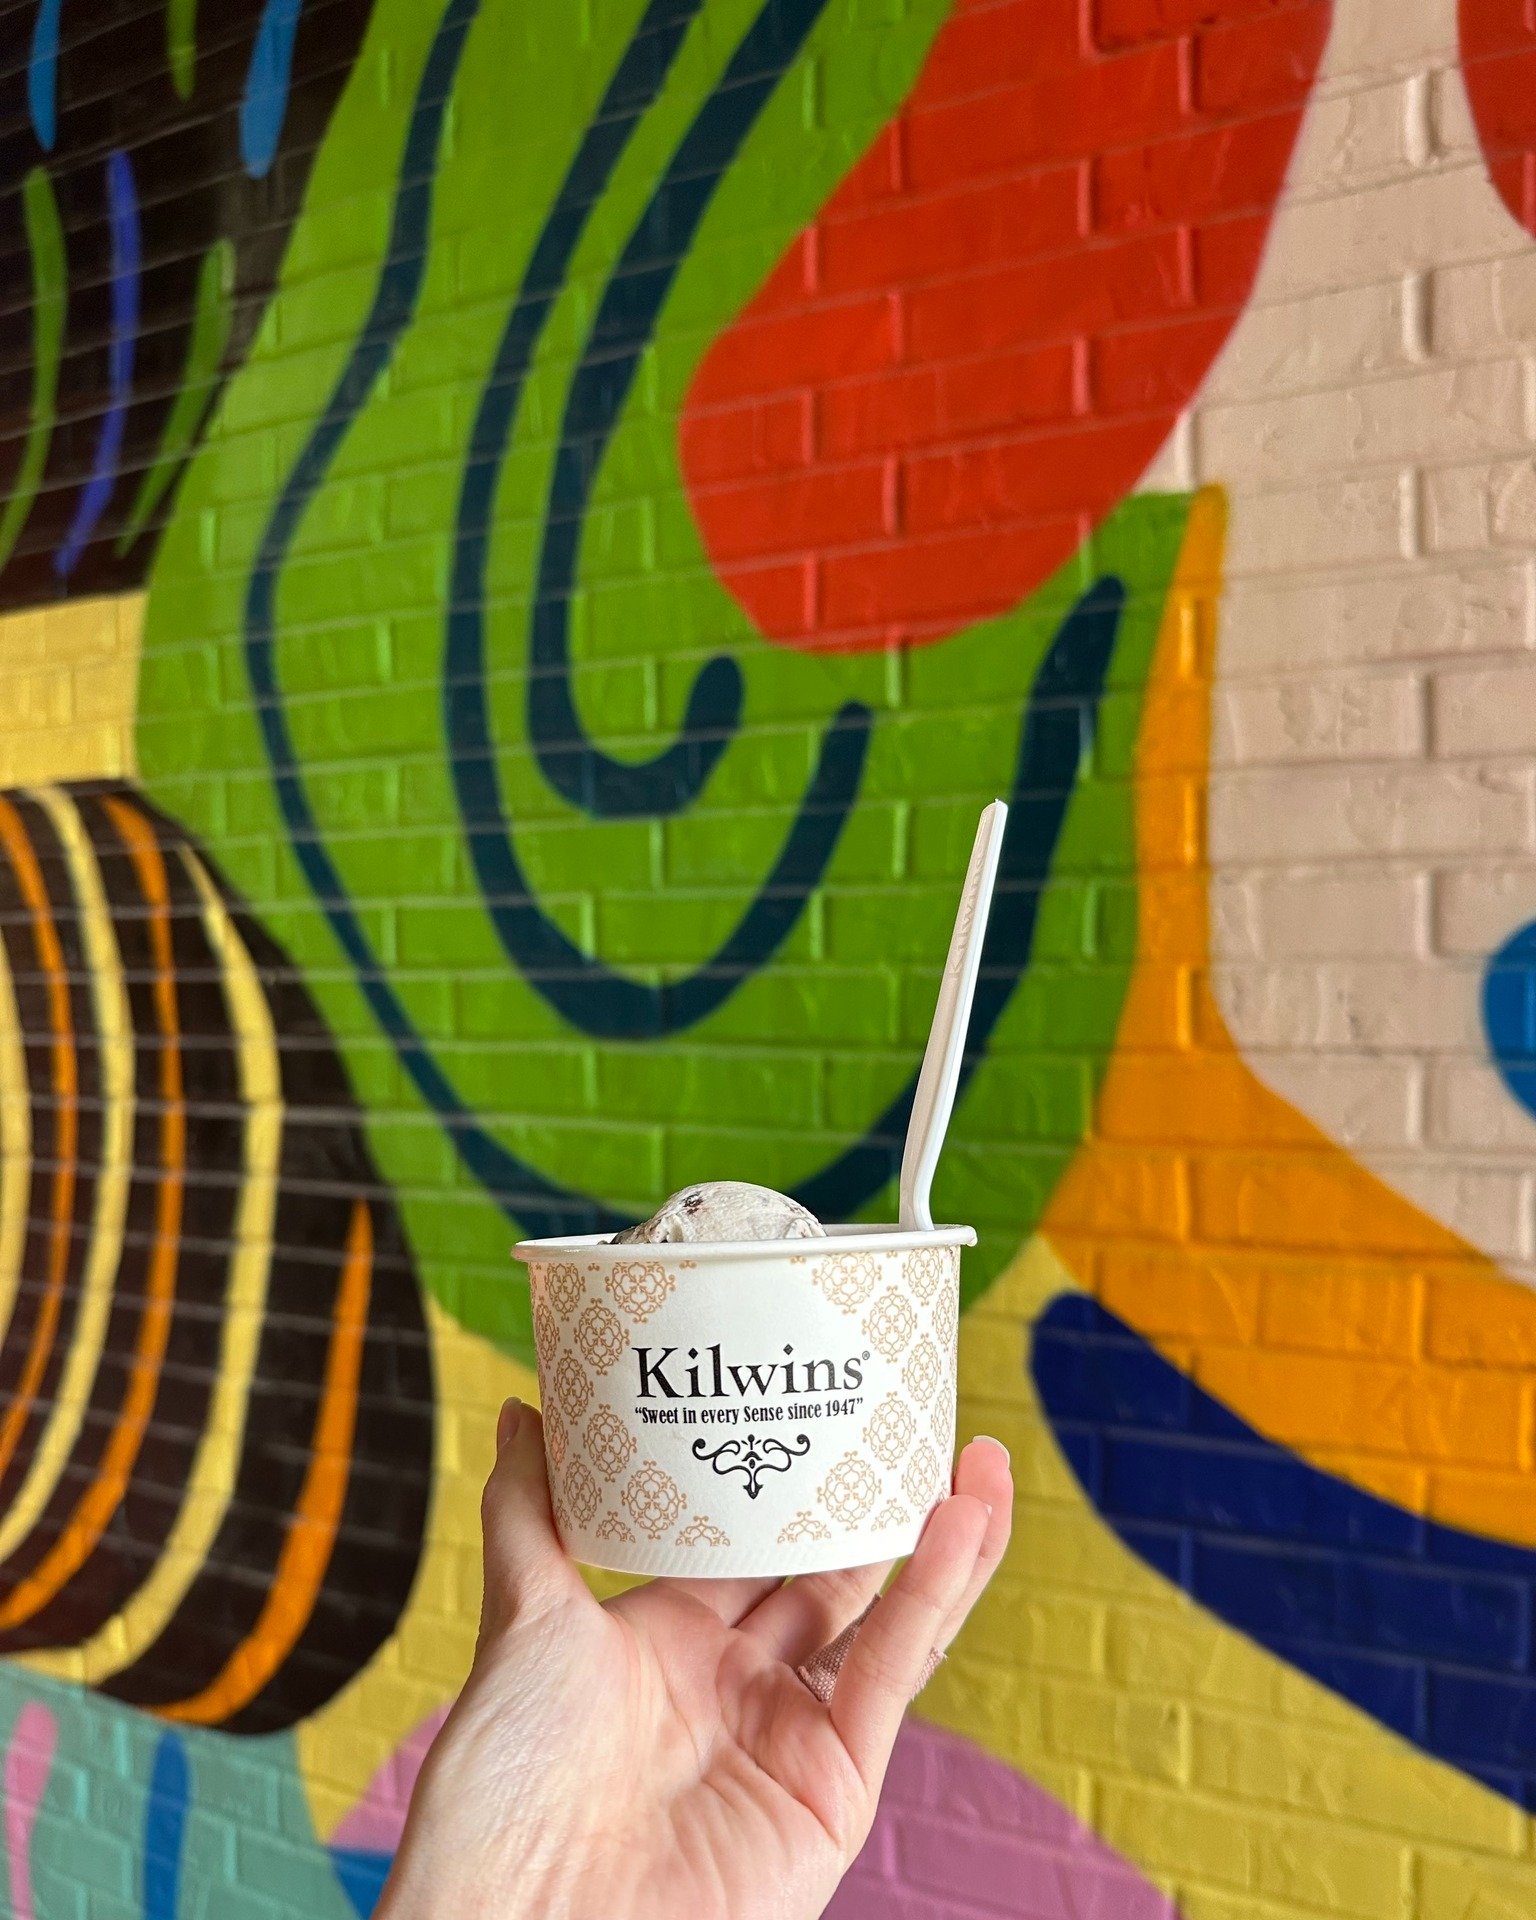 I scream, you scream, we all scream for @kilwinsplano ice cream 😉 🍦 Pop in during a hot day for a scoop of your favorite treat! It&rsquo;s going to be your new go-to spot during the 🔥 Texas summers
.
.
.
#shopsatlegacyeast #theshopsatlegacyeast #l